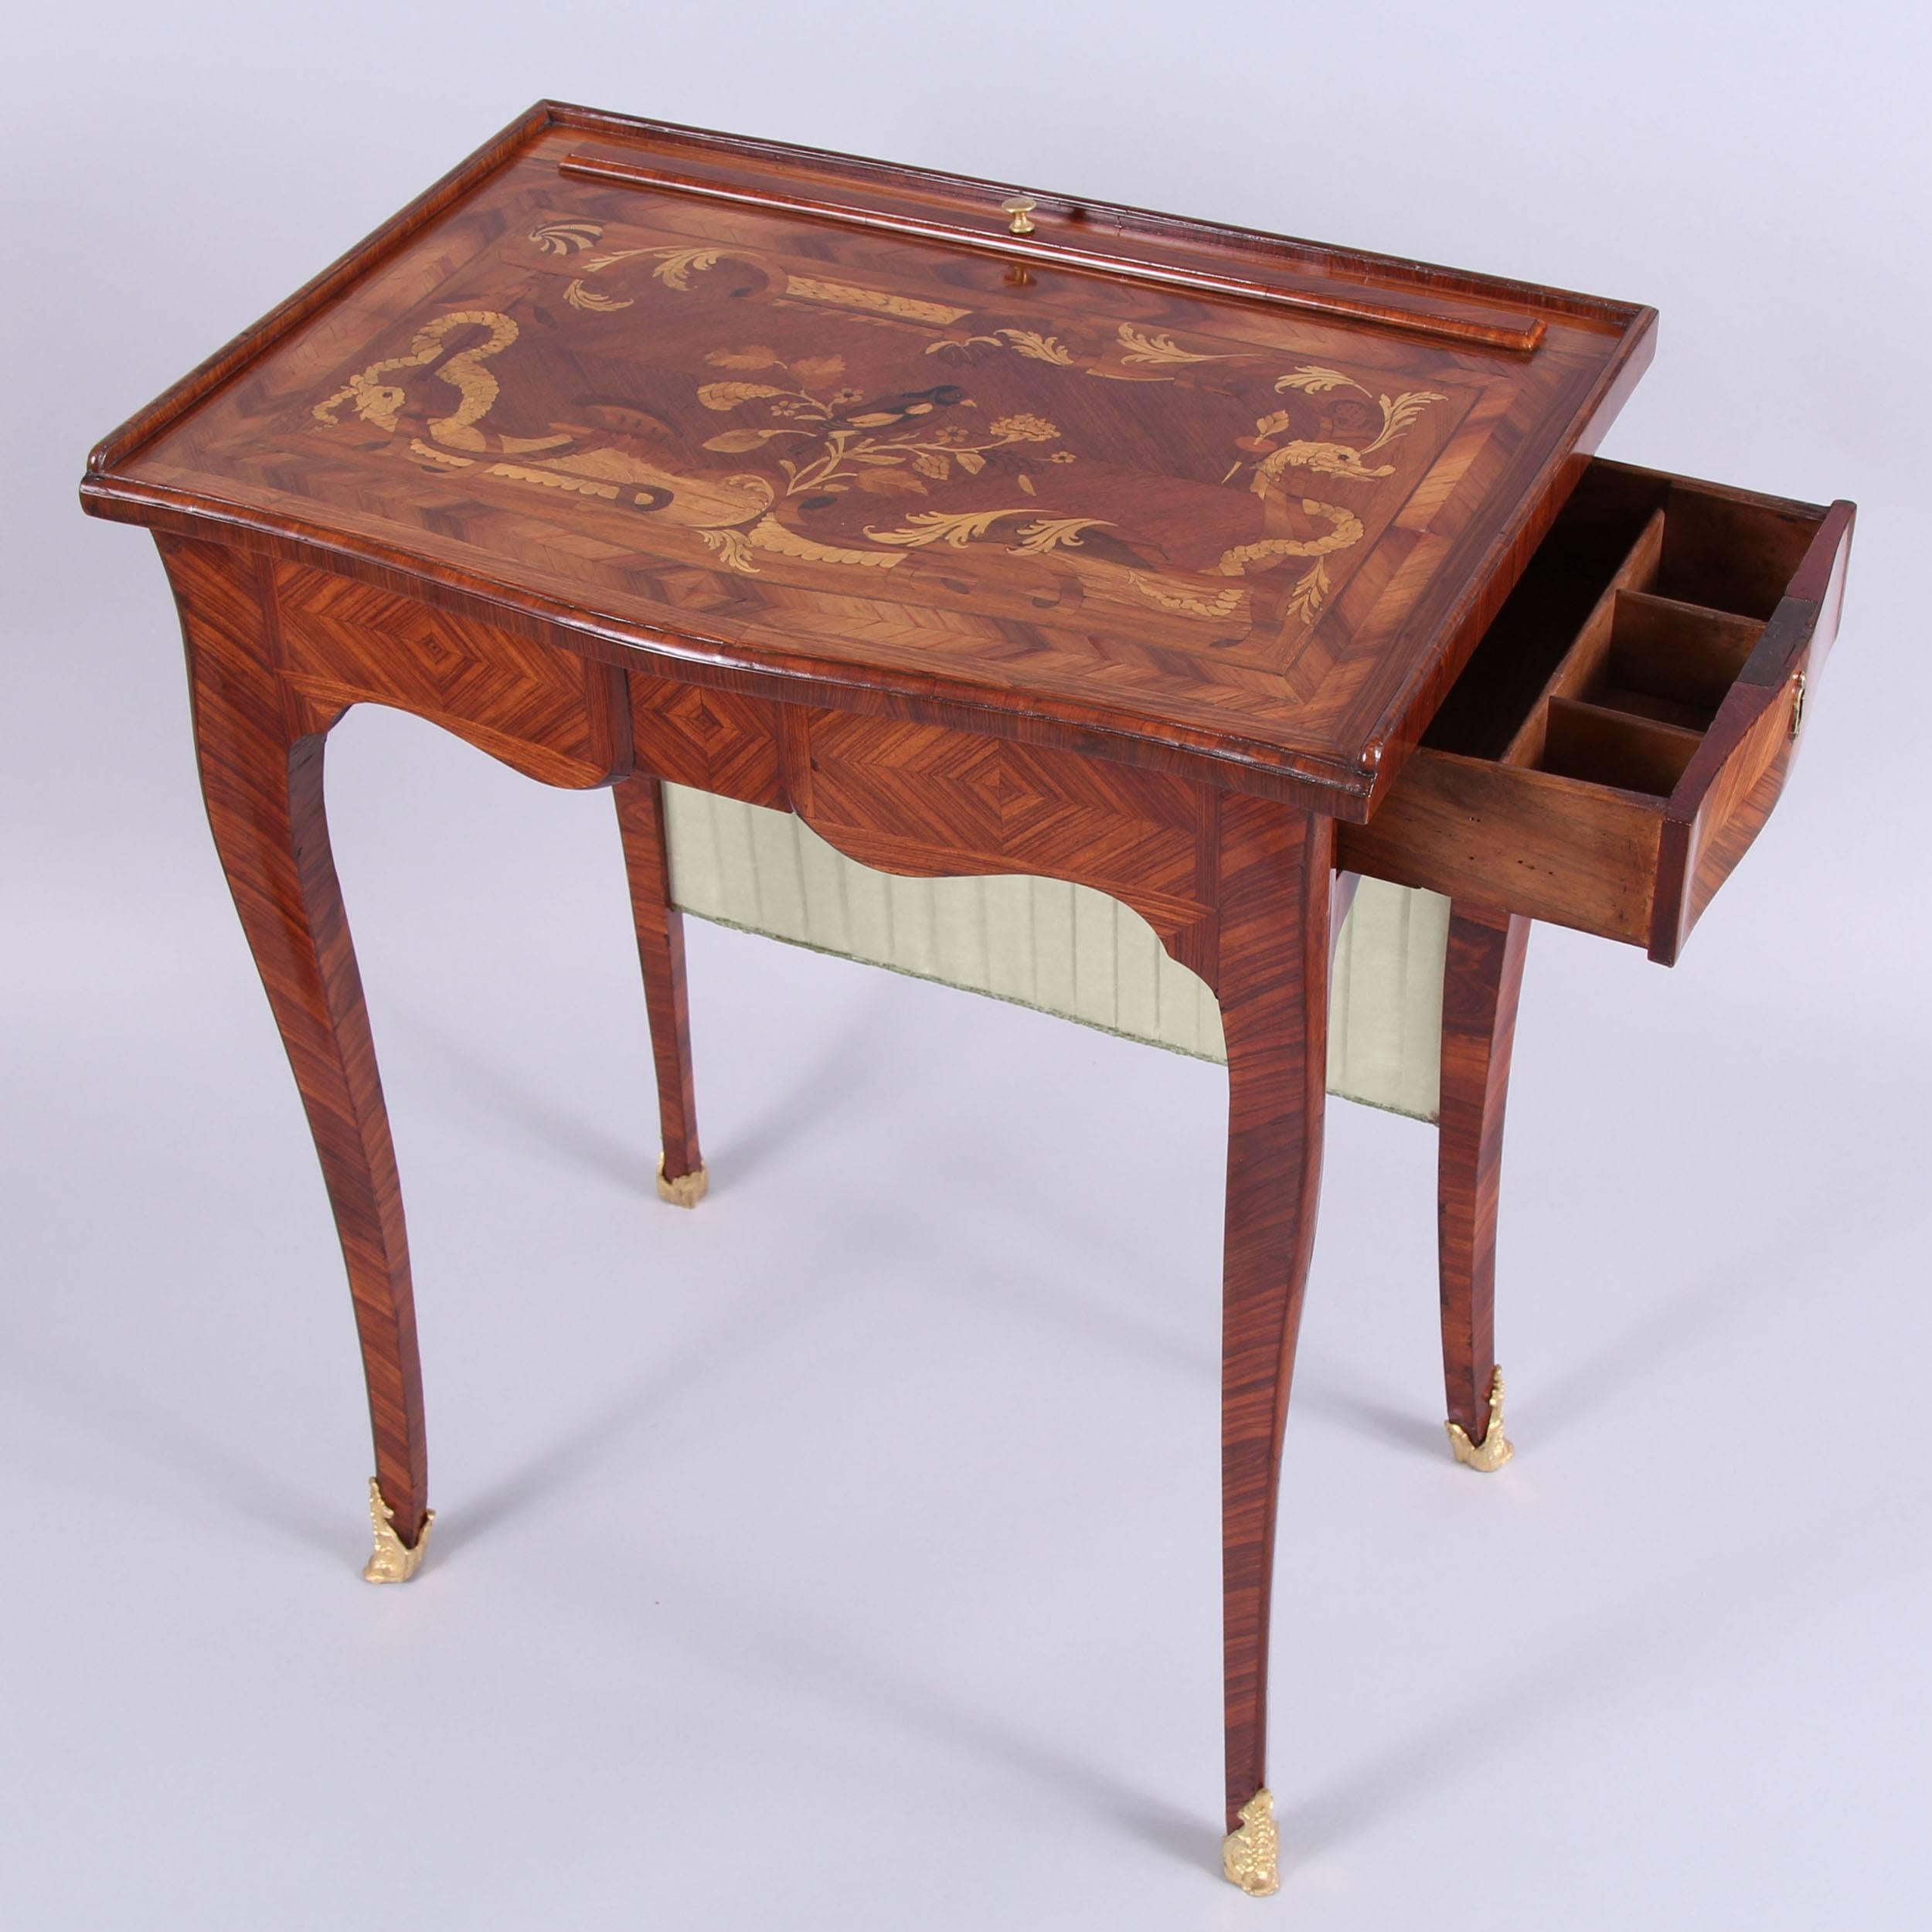 France, circa 1770.

The rarity of this piece cannot be overstated, the marquetry design, including entwined serpents and a central song bird are a supreme example of Boudin's eye for detail and perfection in execution. Stamped on the underneath